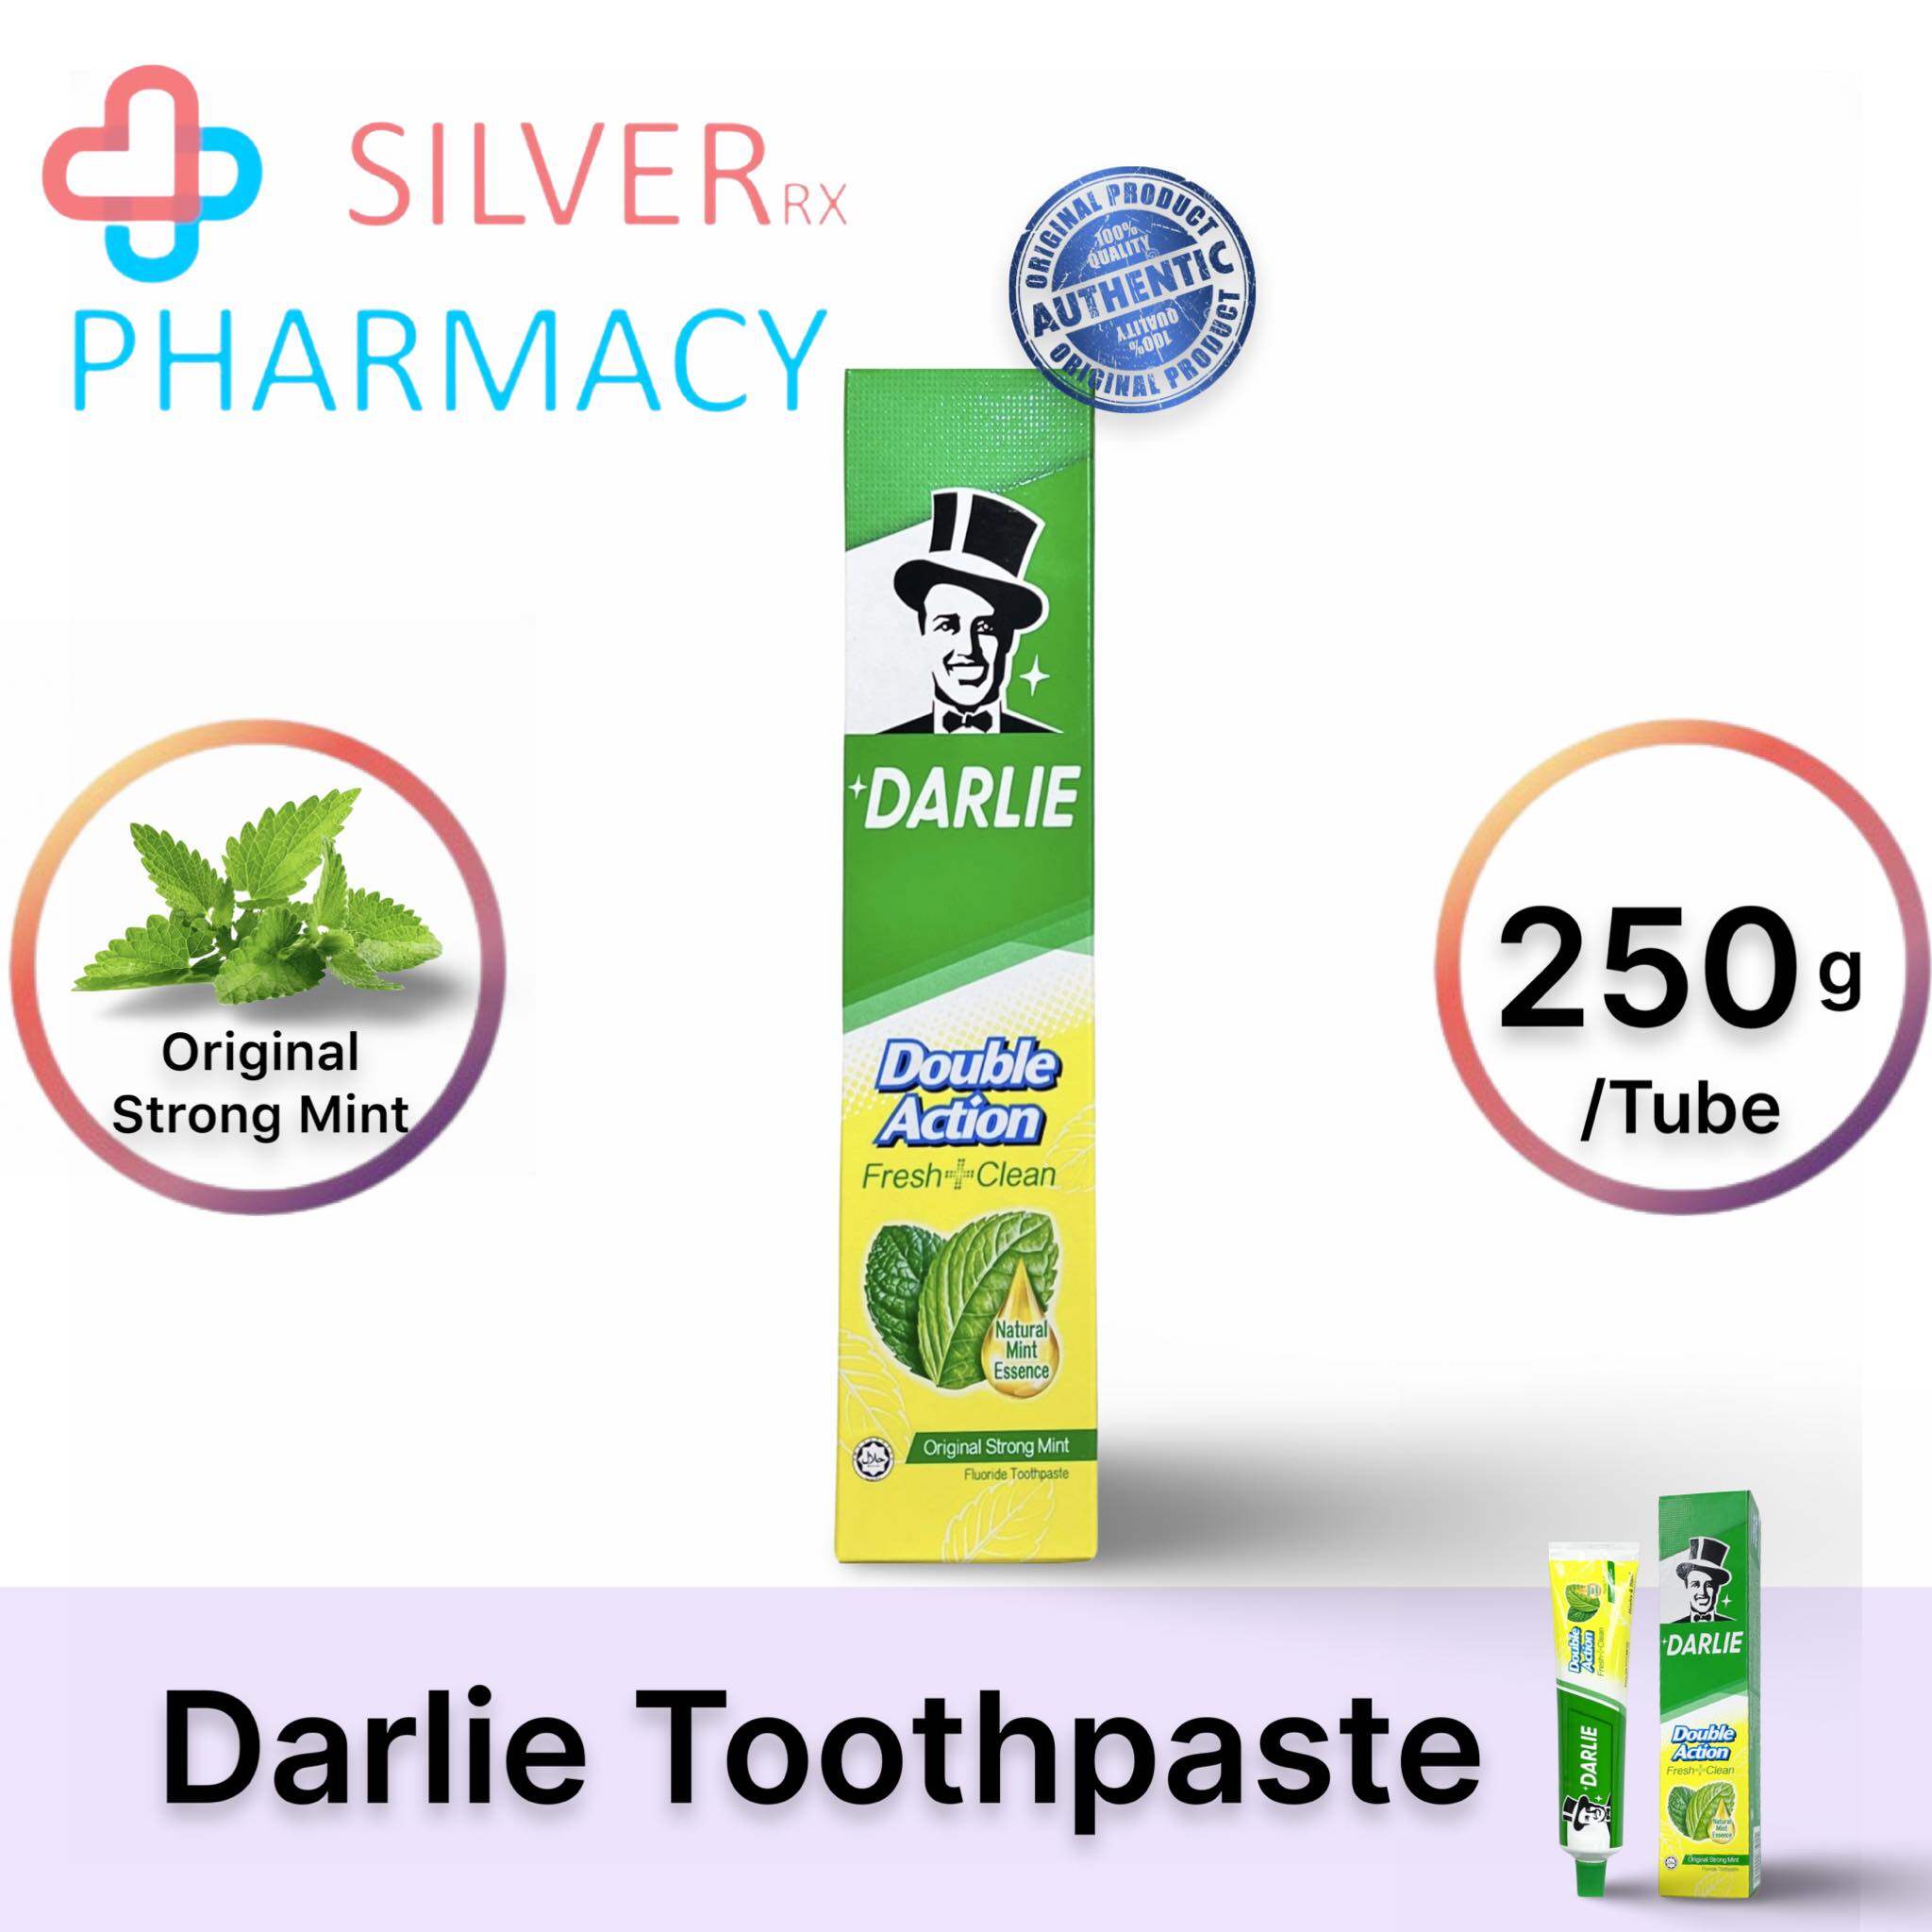 Darlie Double Action Original Strong Mint Toothpaste 250g [Single/Twin] 黑人牙膏